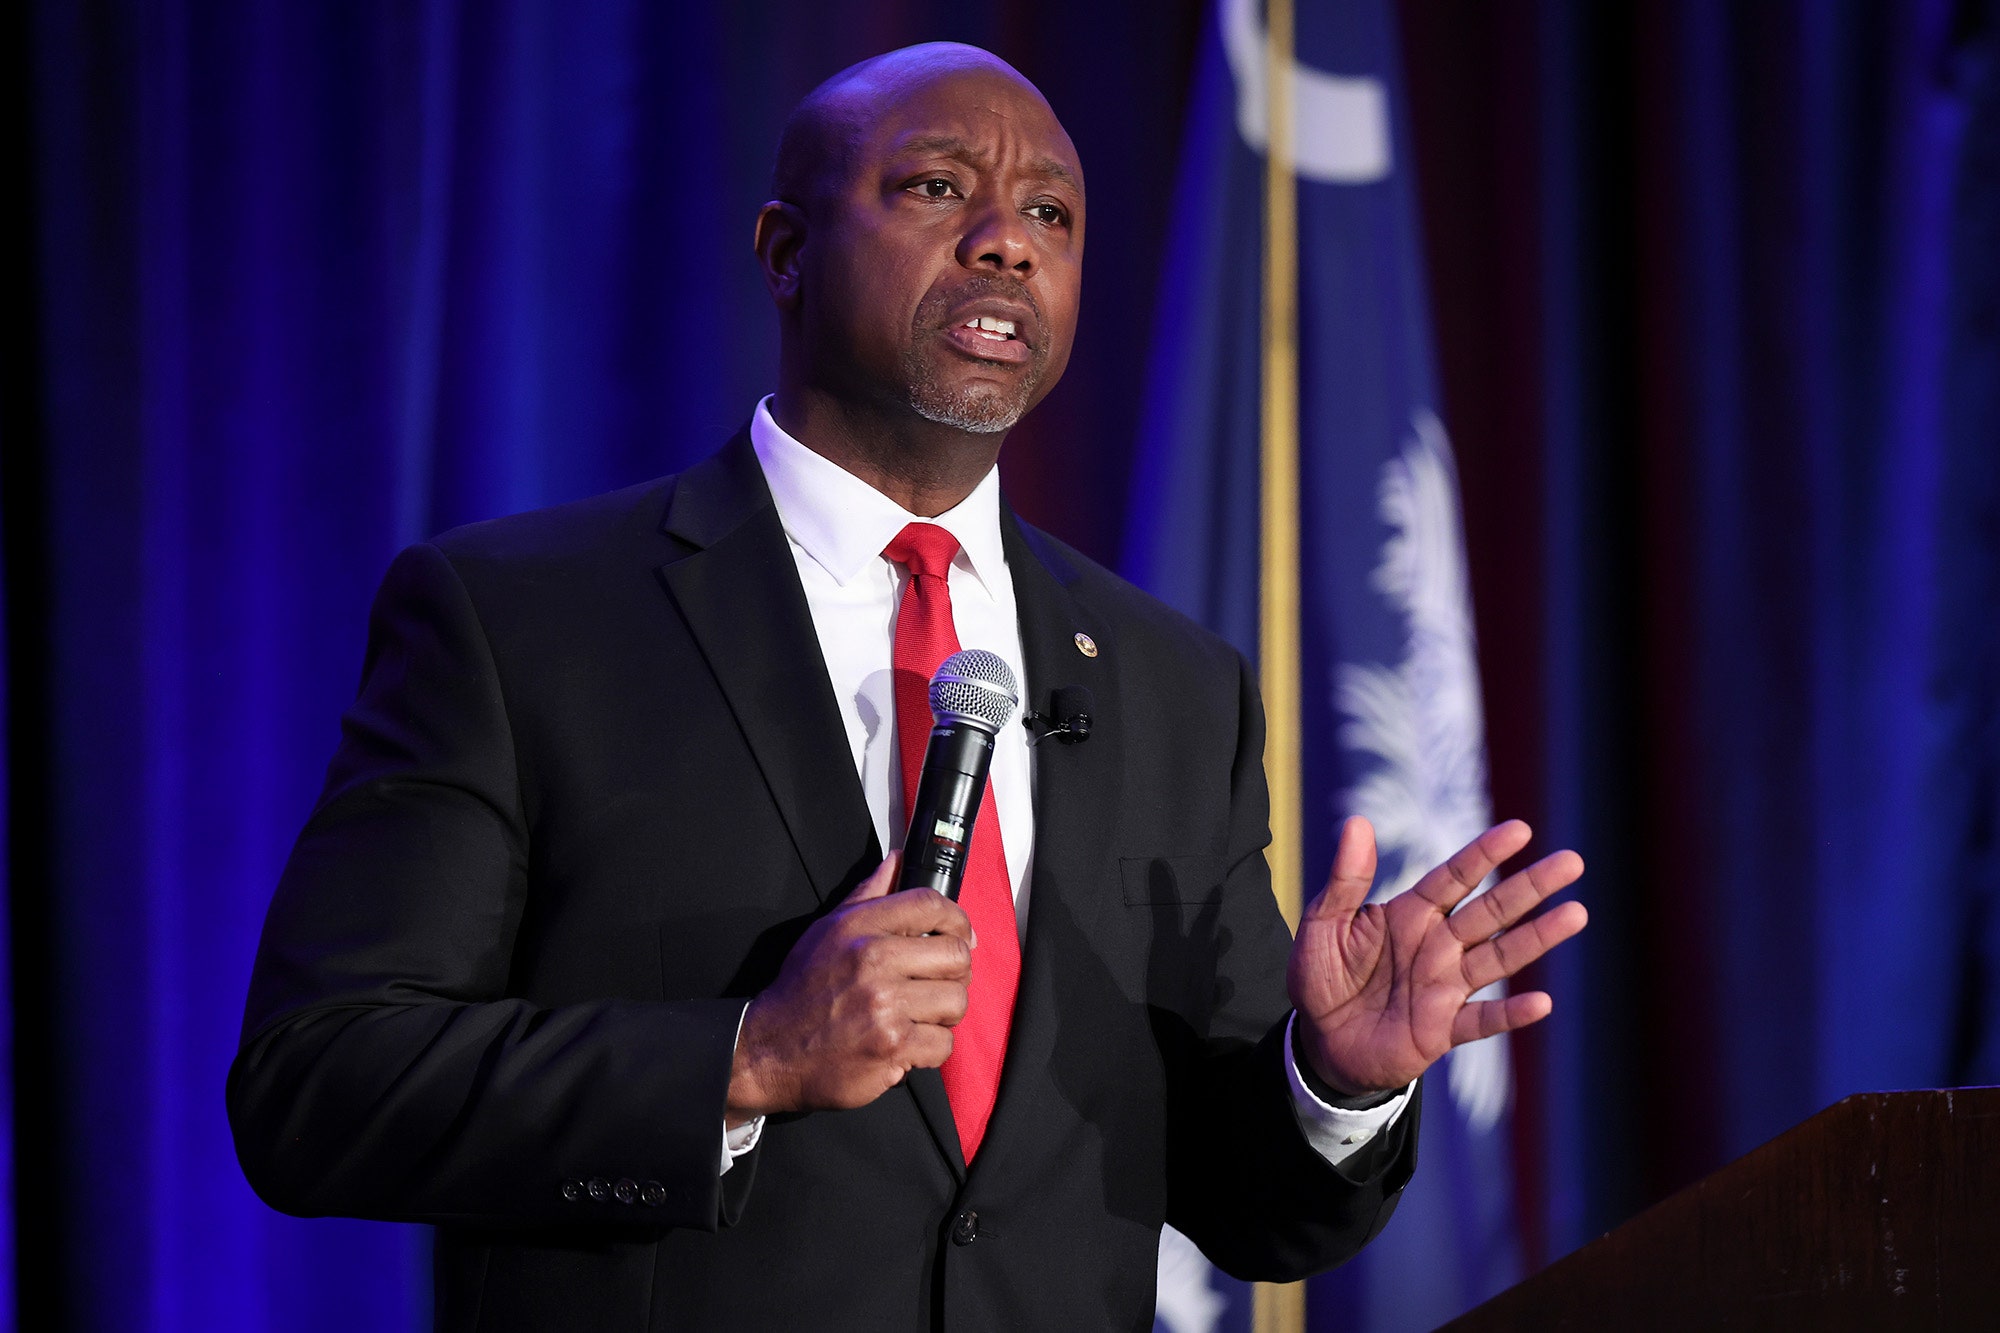 Tim Scott Needs the Evangelical Vote. So Does Each Different Republican Candidate